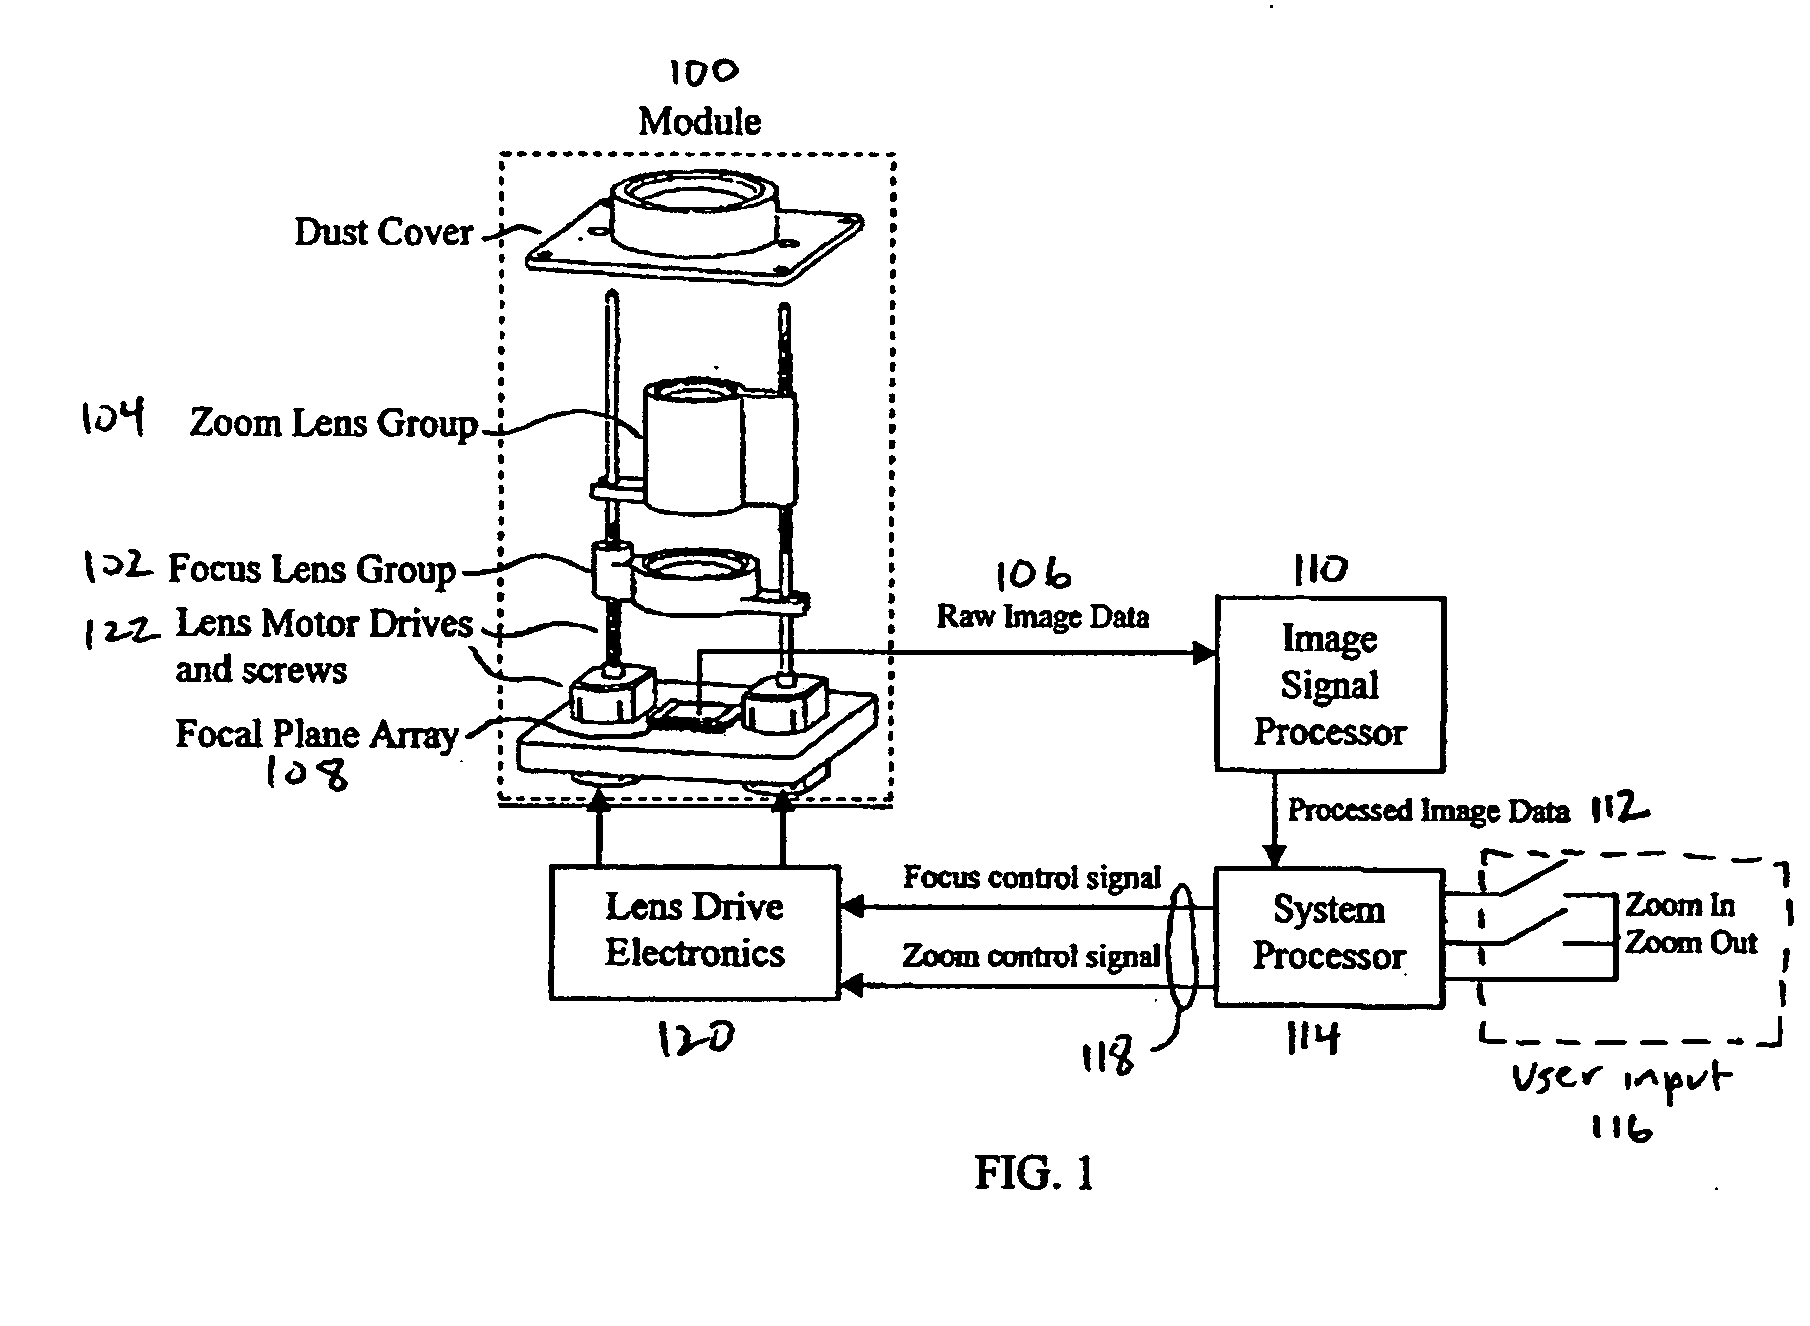 Method and apparatus for controlling a lens, and camera module incorporating same